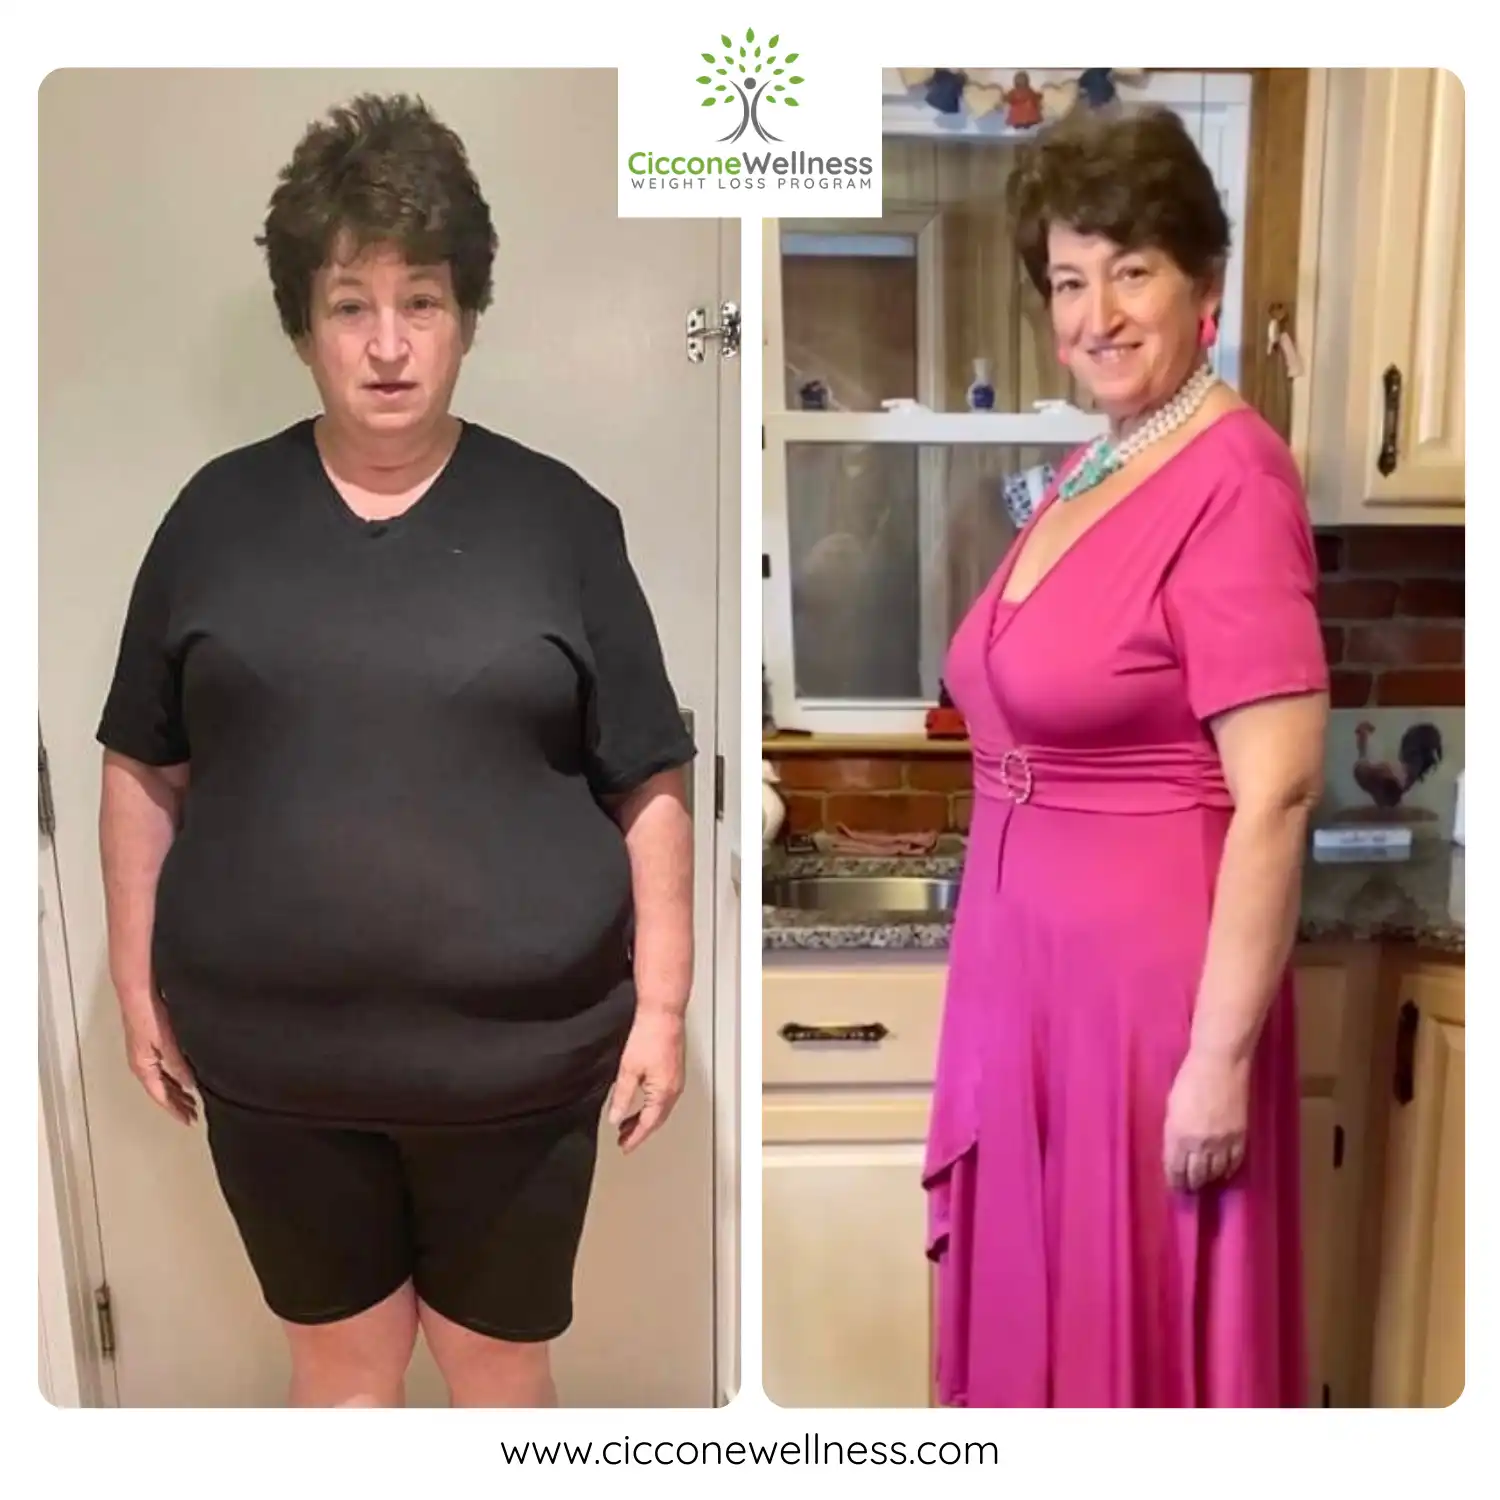 Where are they now? Installment 16: Debbie’s Journey to Sustainable Weight Loss